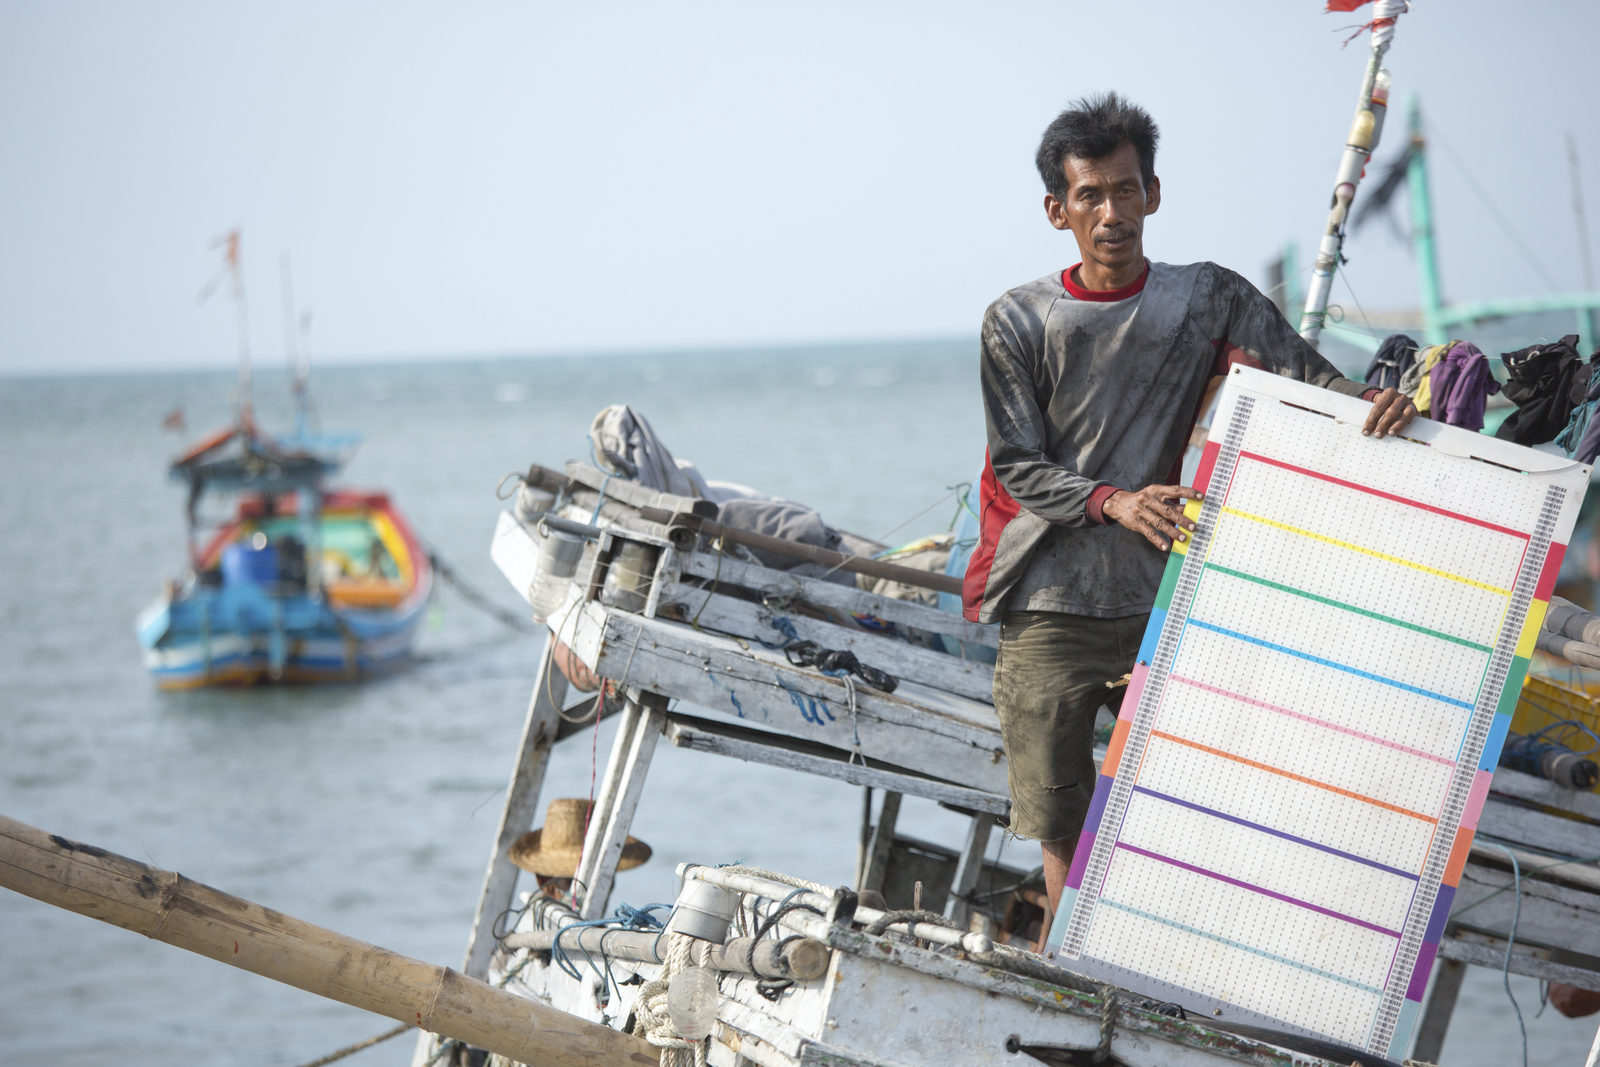 A man holds a colored board while on a boat.